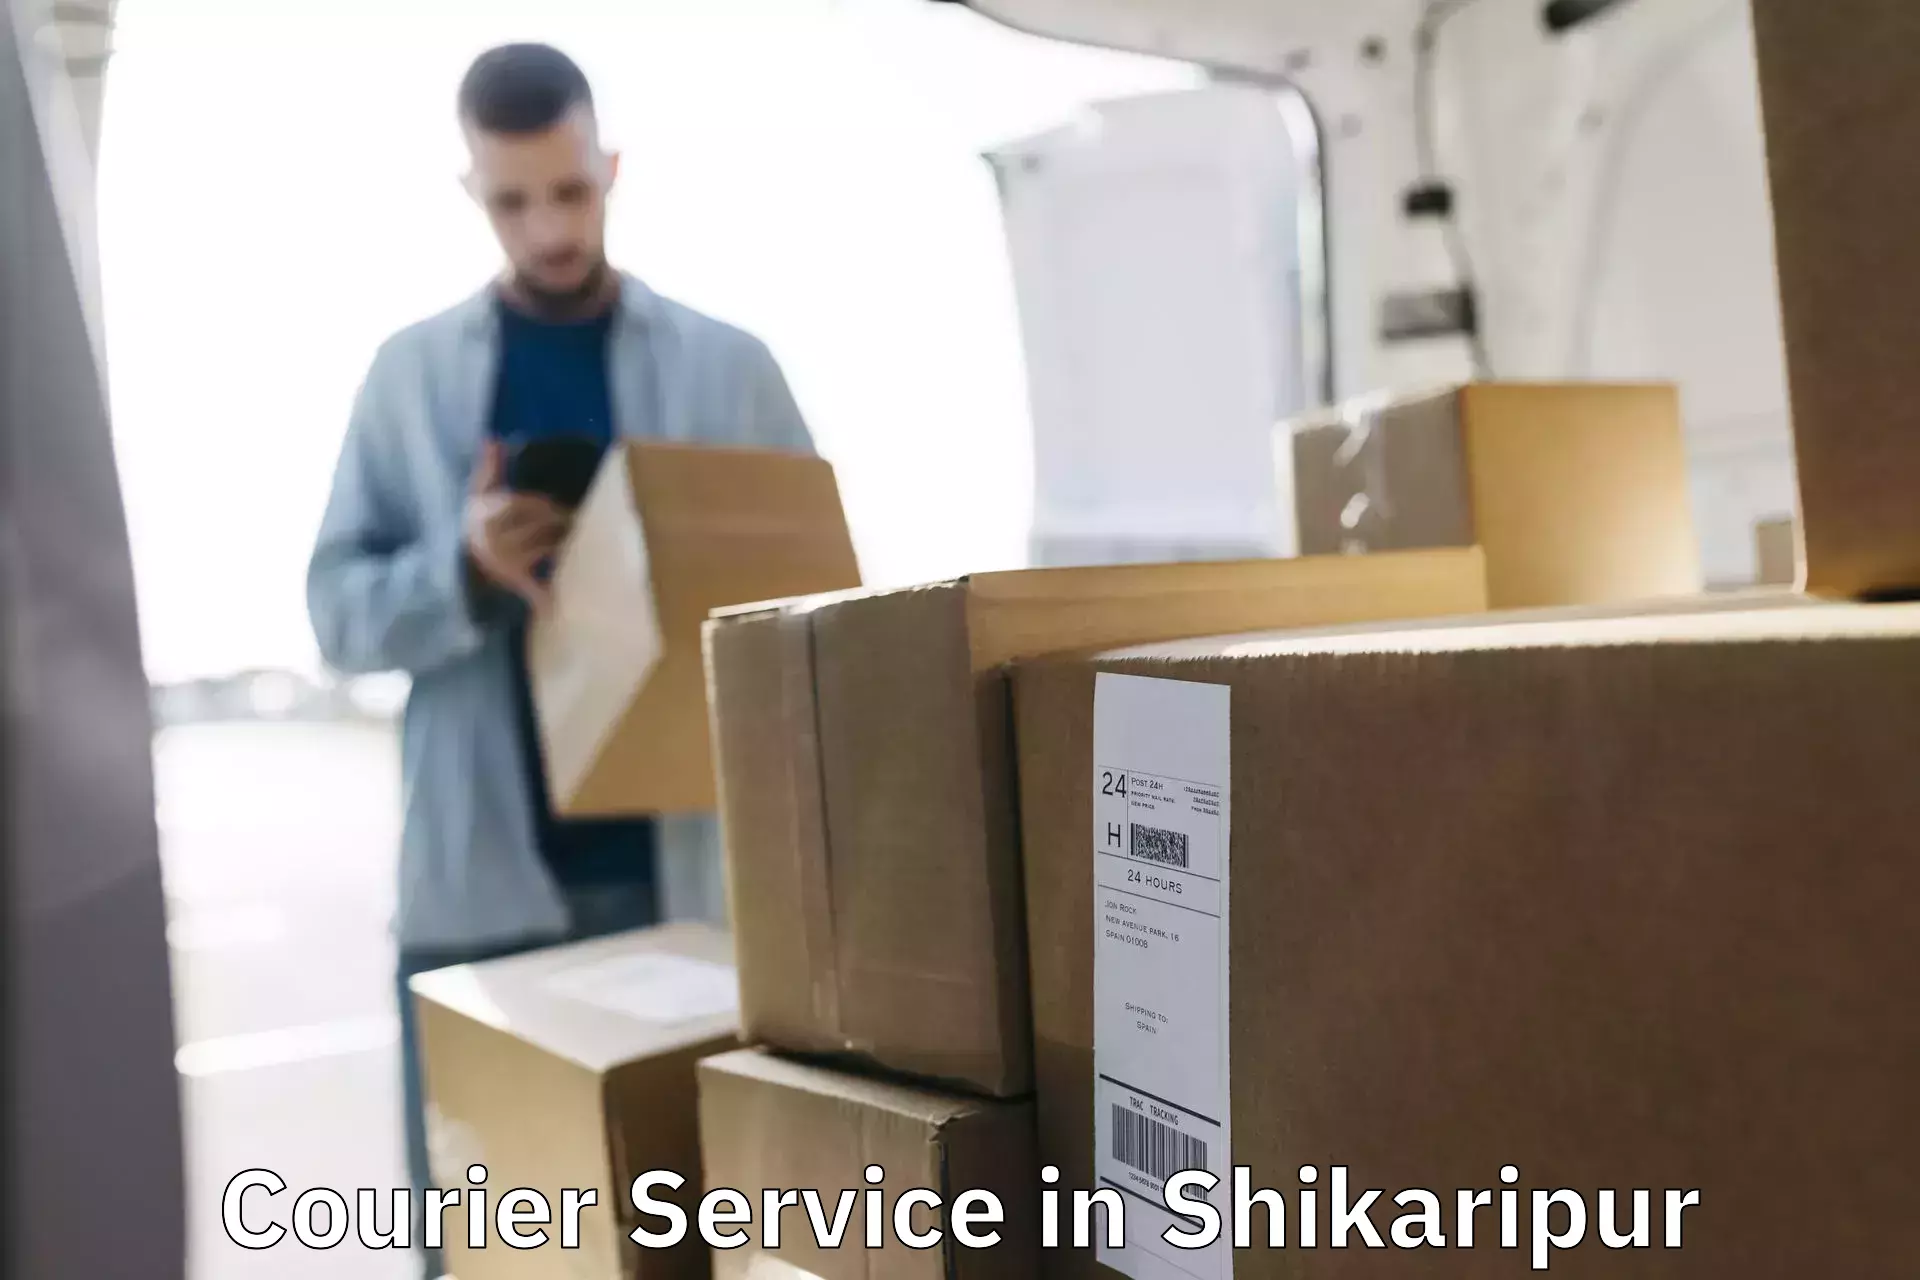 Postal and courier services in Shikaripur